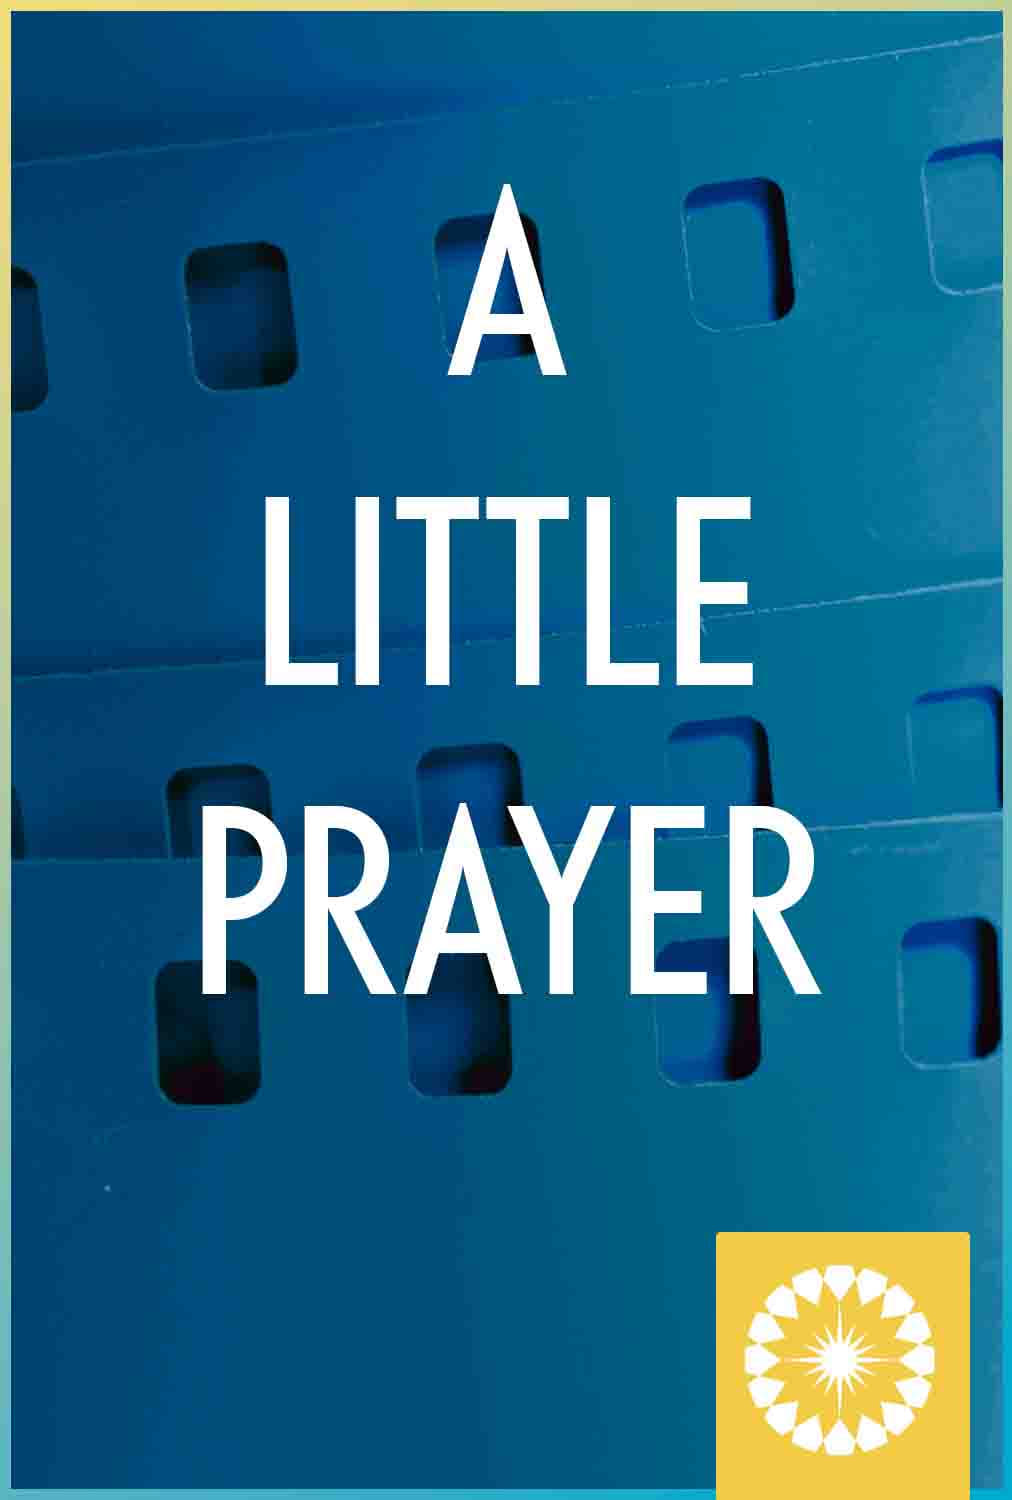 Poster for the movie "A Little Prayer"